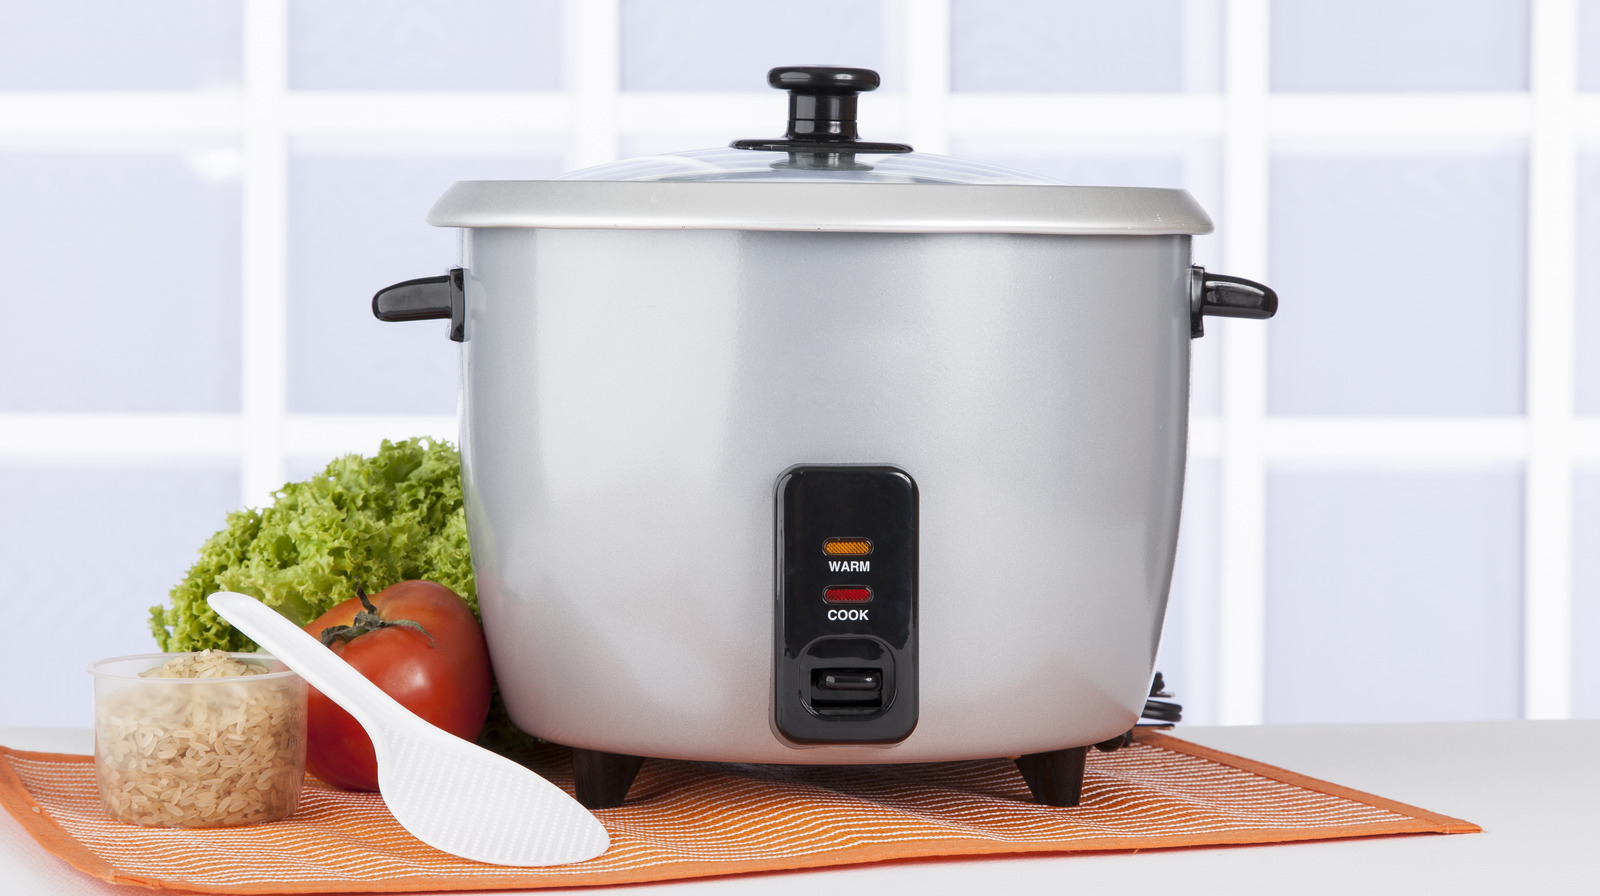 https://www.tastingtable.com/img/gallery/the-absolute-best-uses-for-your-rice-cooker/l-intro-1657106697.jpg